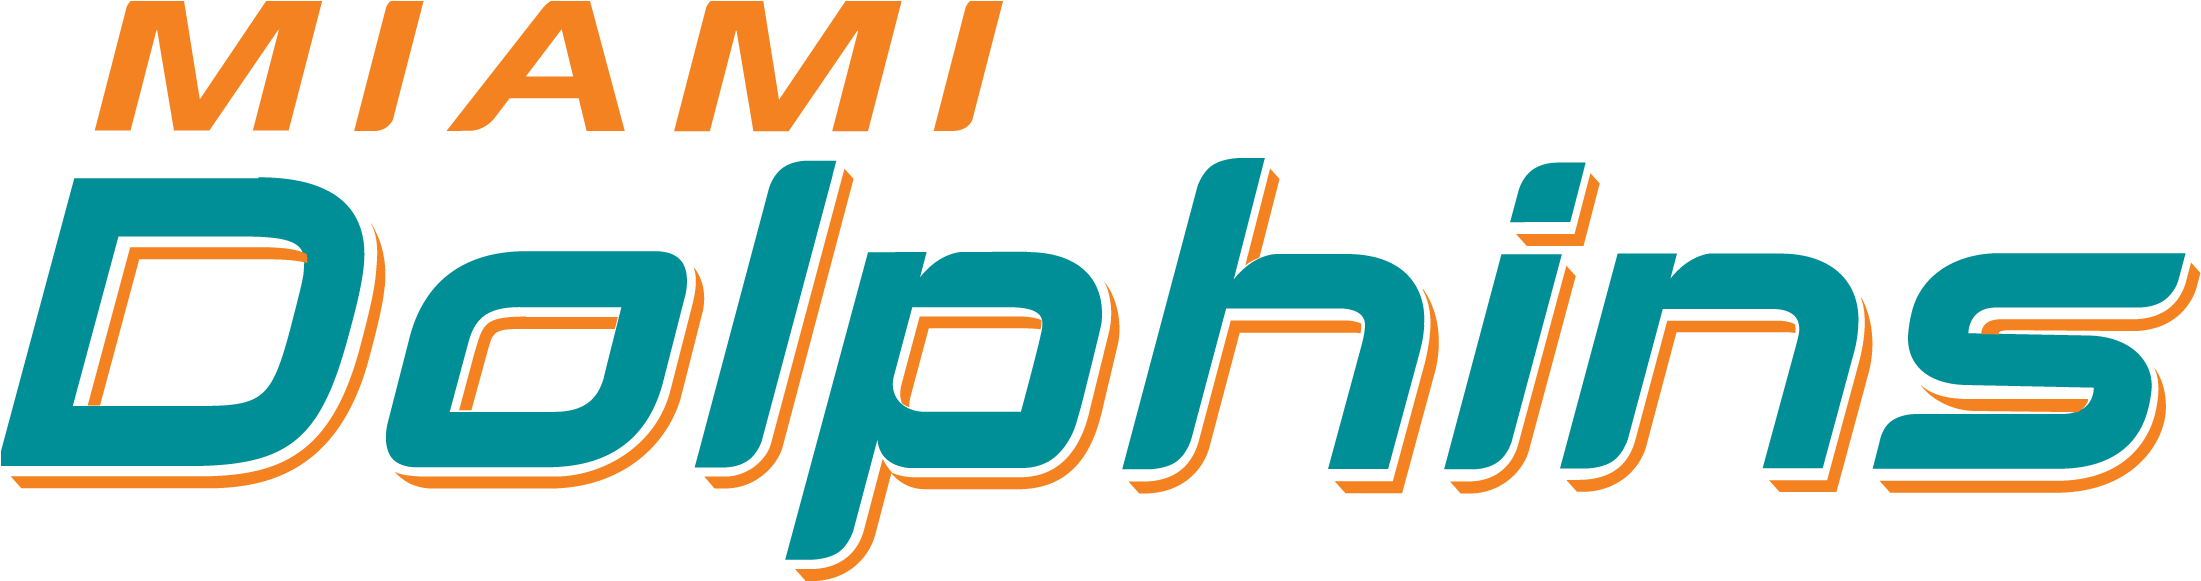 Miami Dolphins Logo Font - Miami Dolphins Logo 2013 (2400x800), Png Download